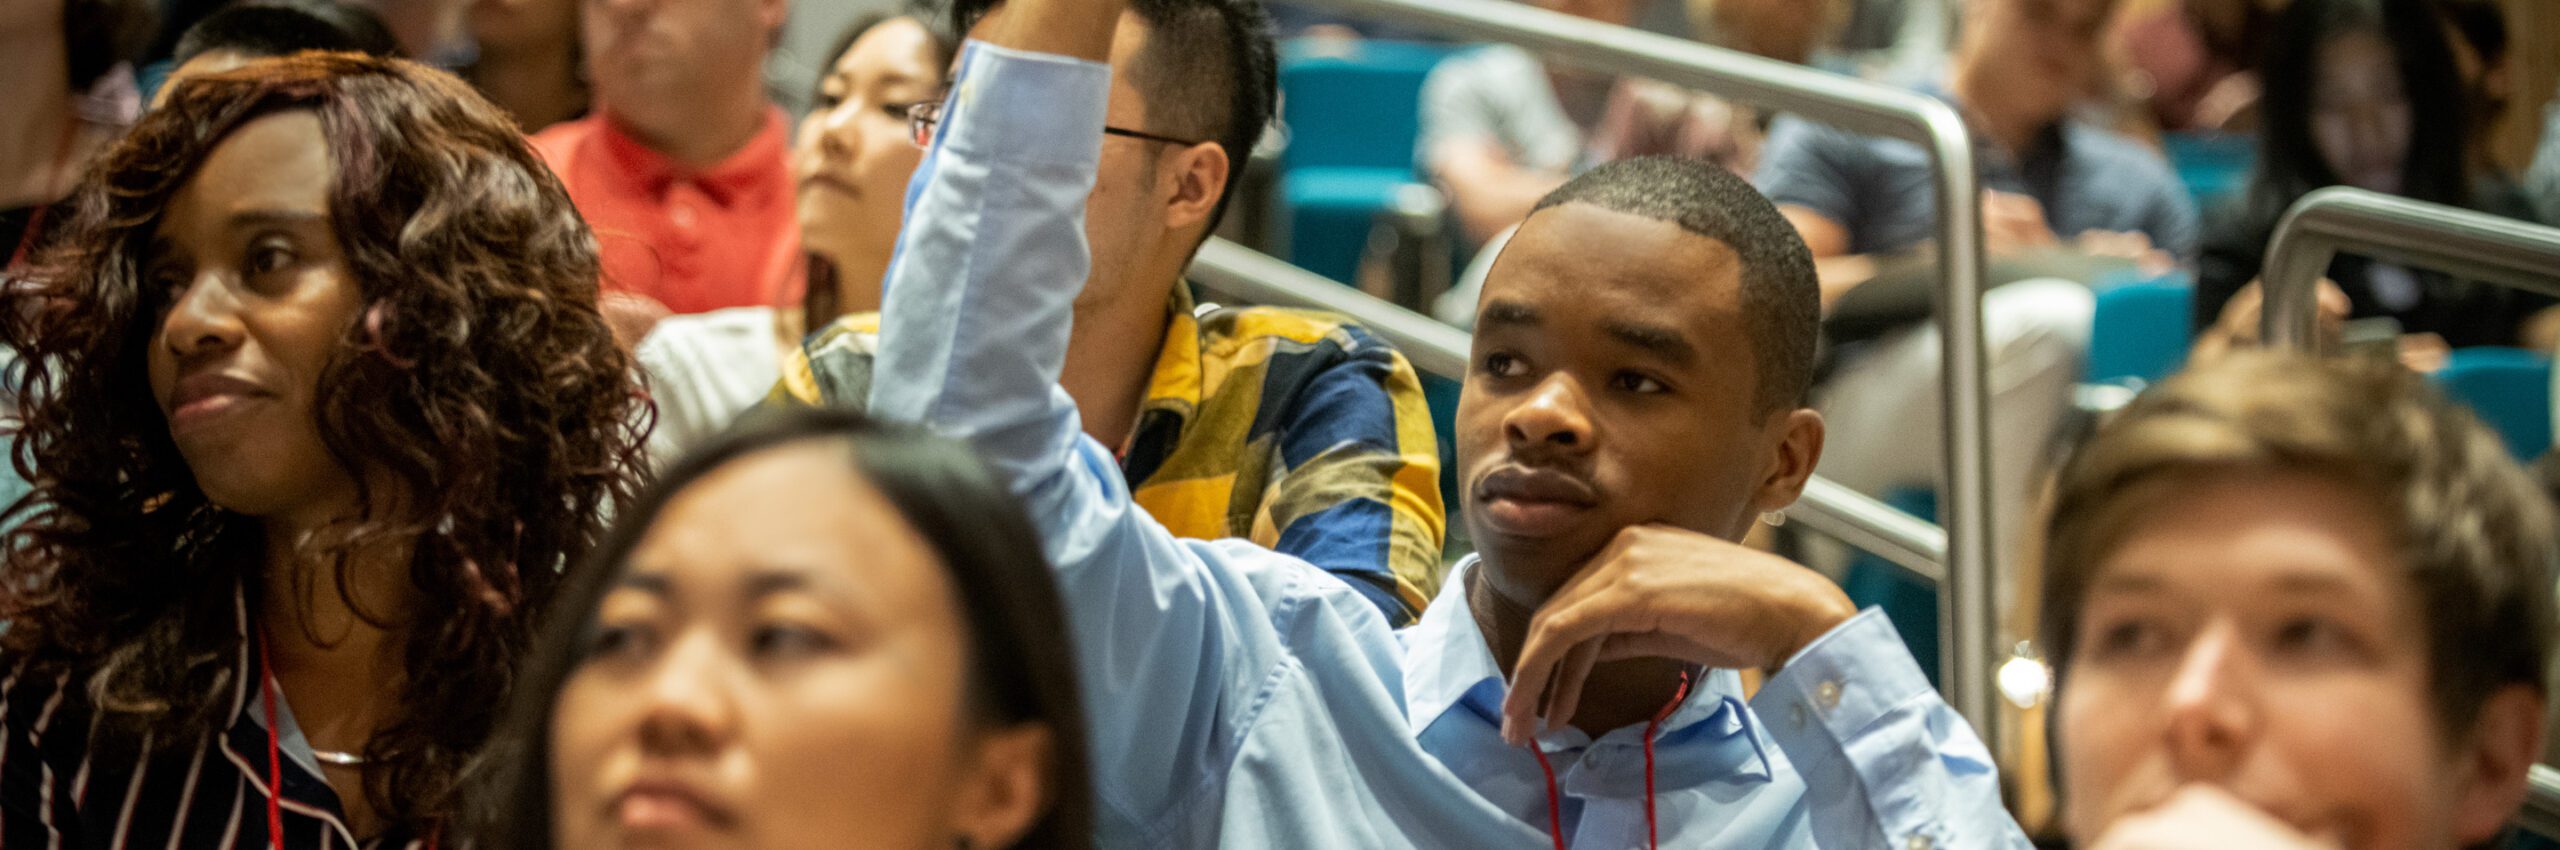 A student raises his hand during a lecture